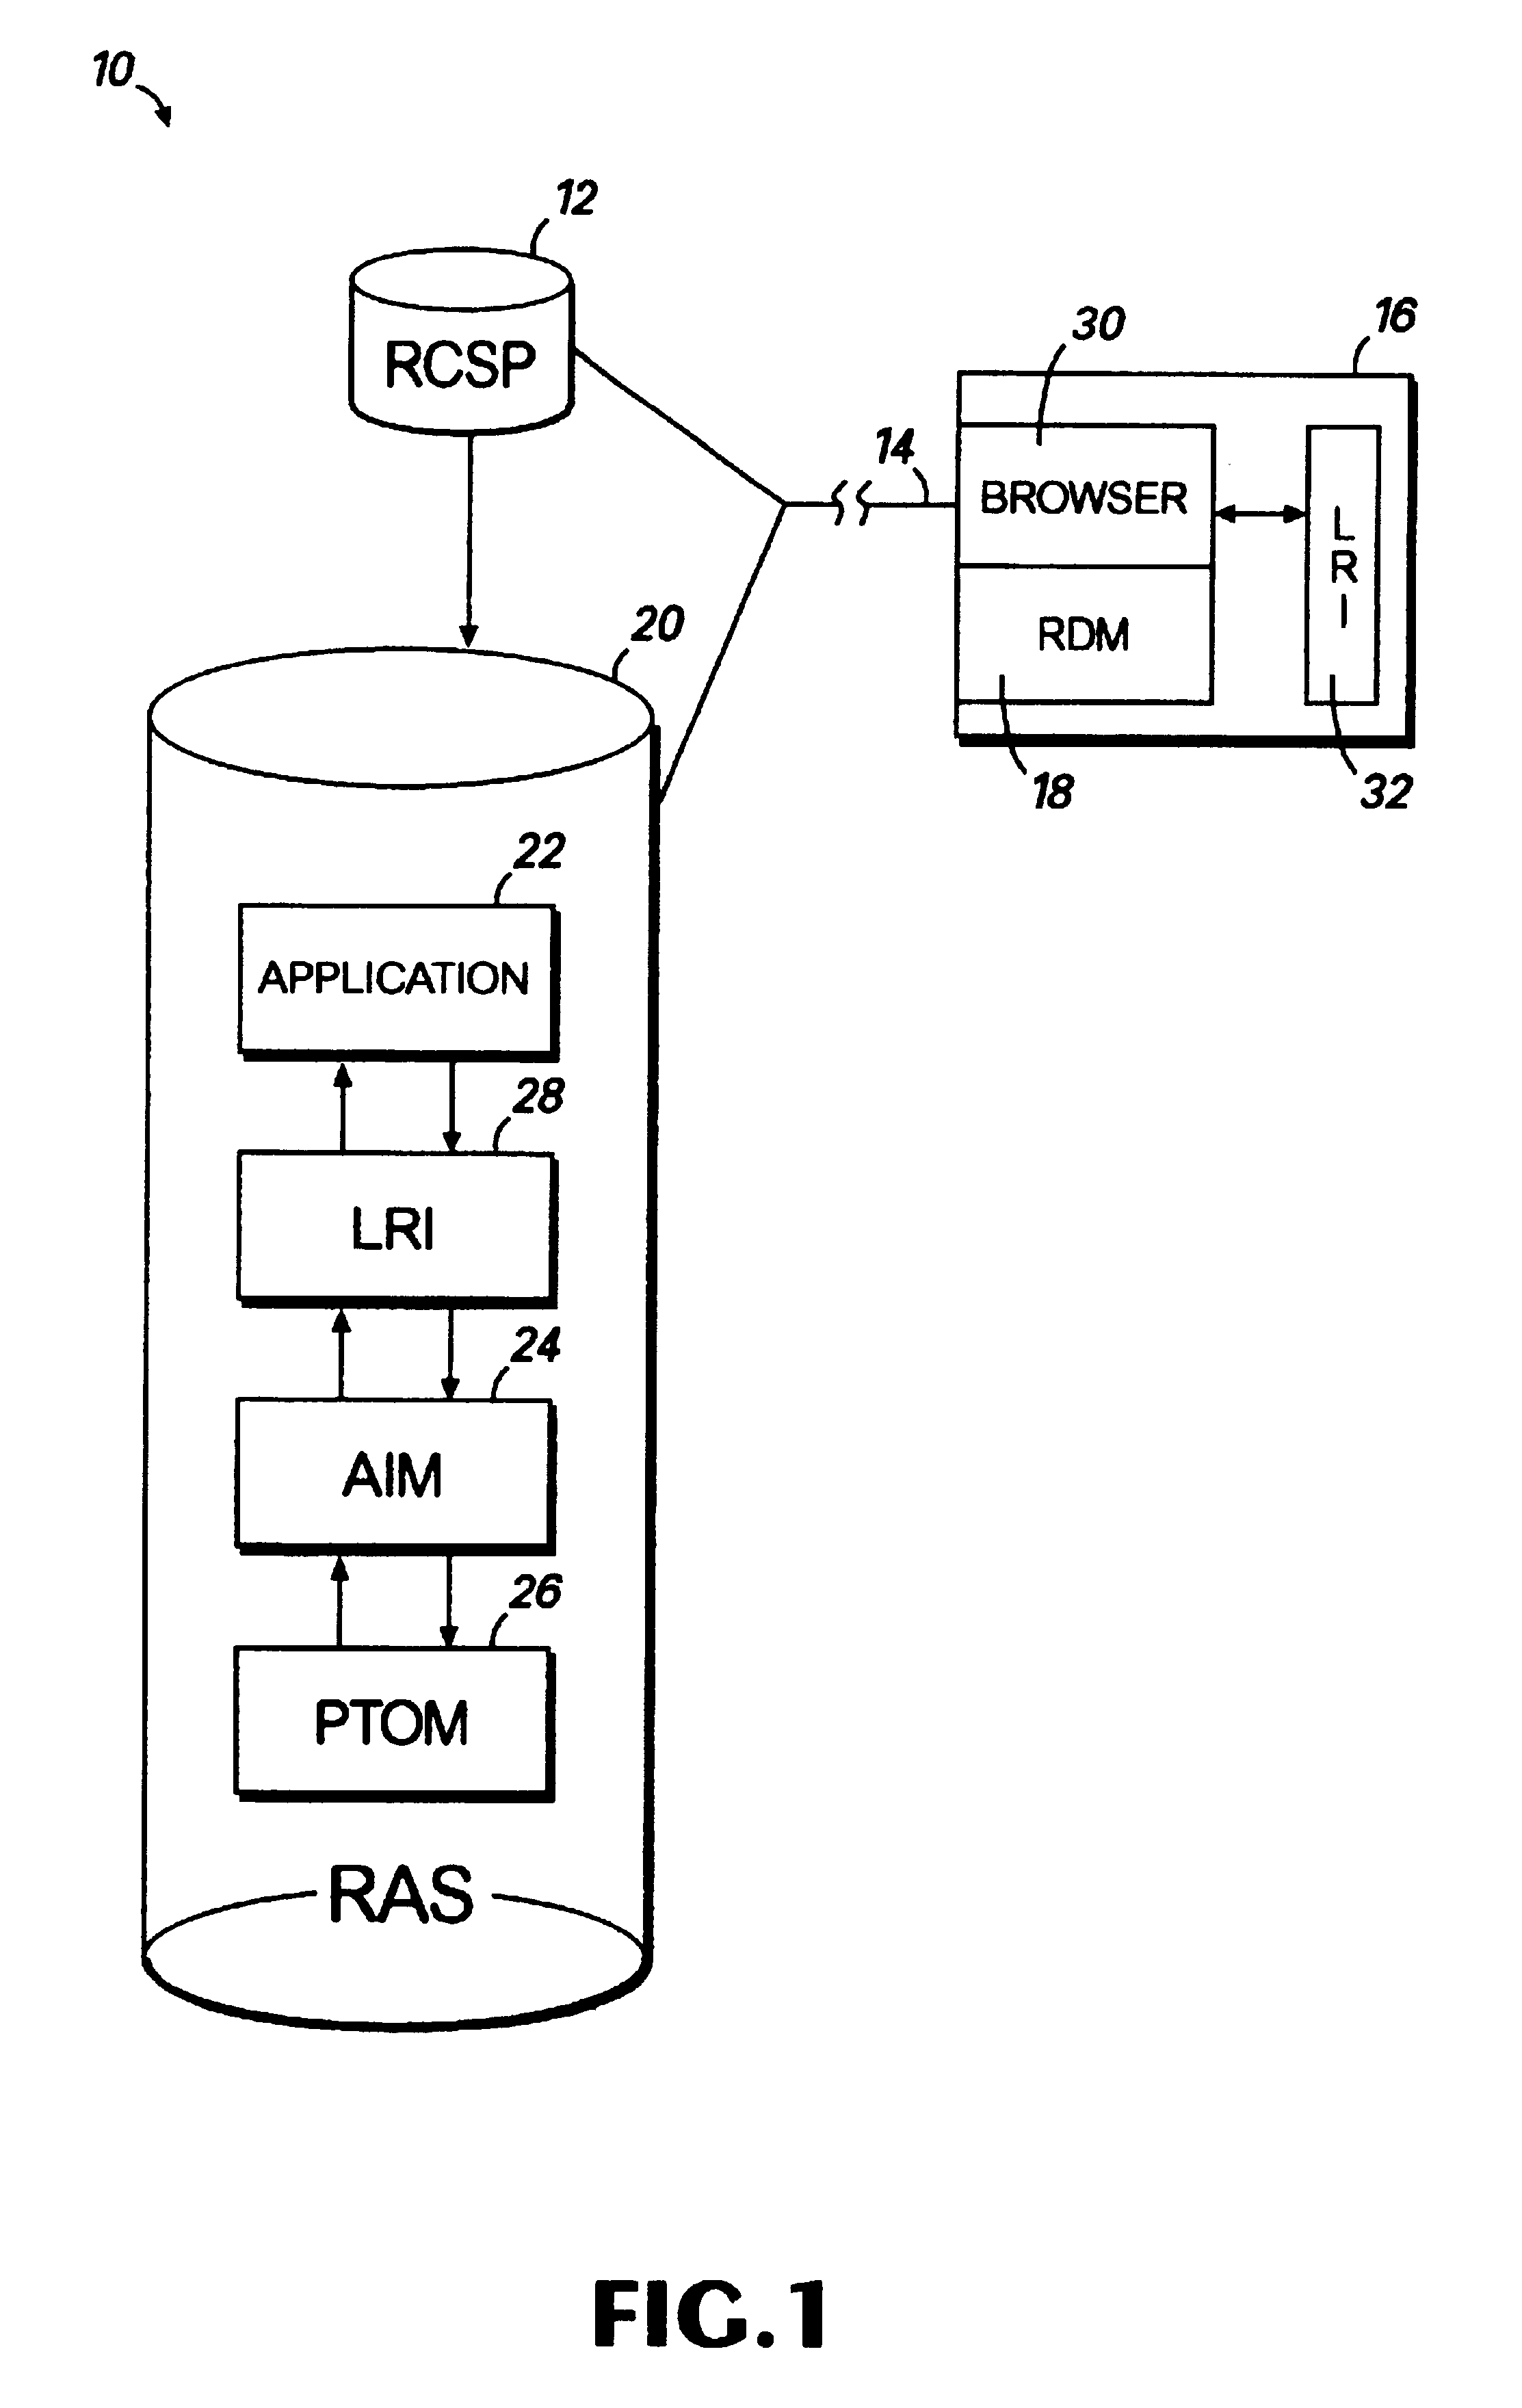 Method and system for on demand downloading of module to enable remote control of an application program over a network